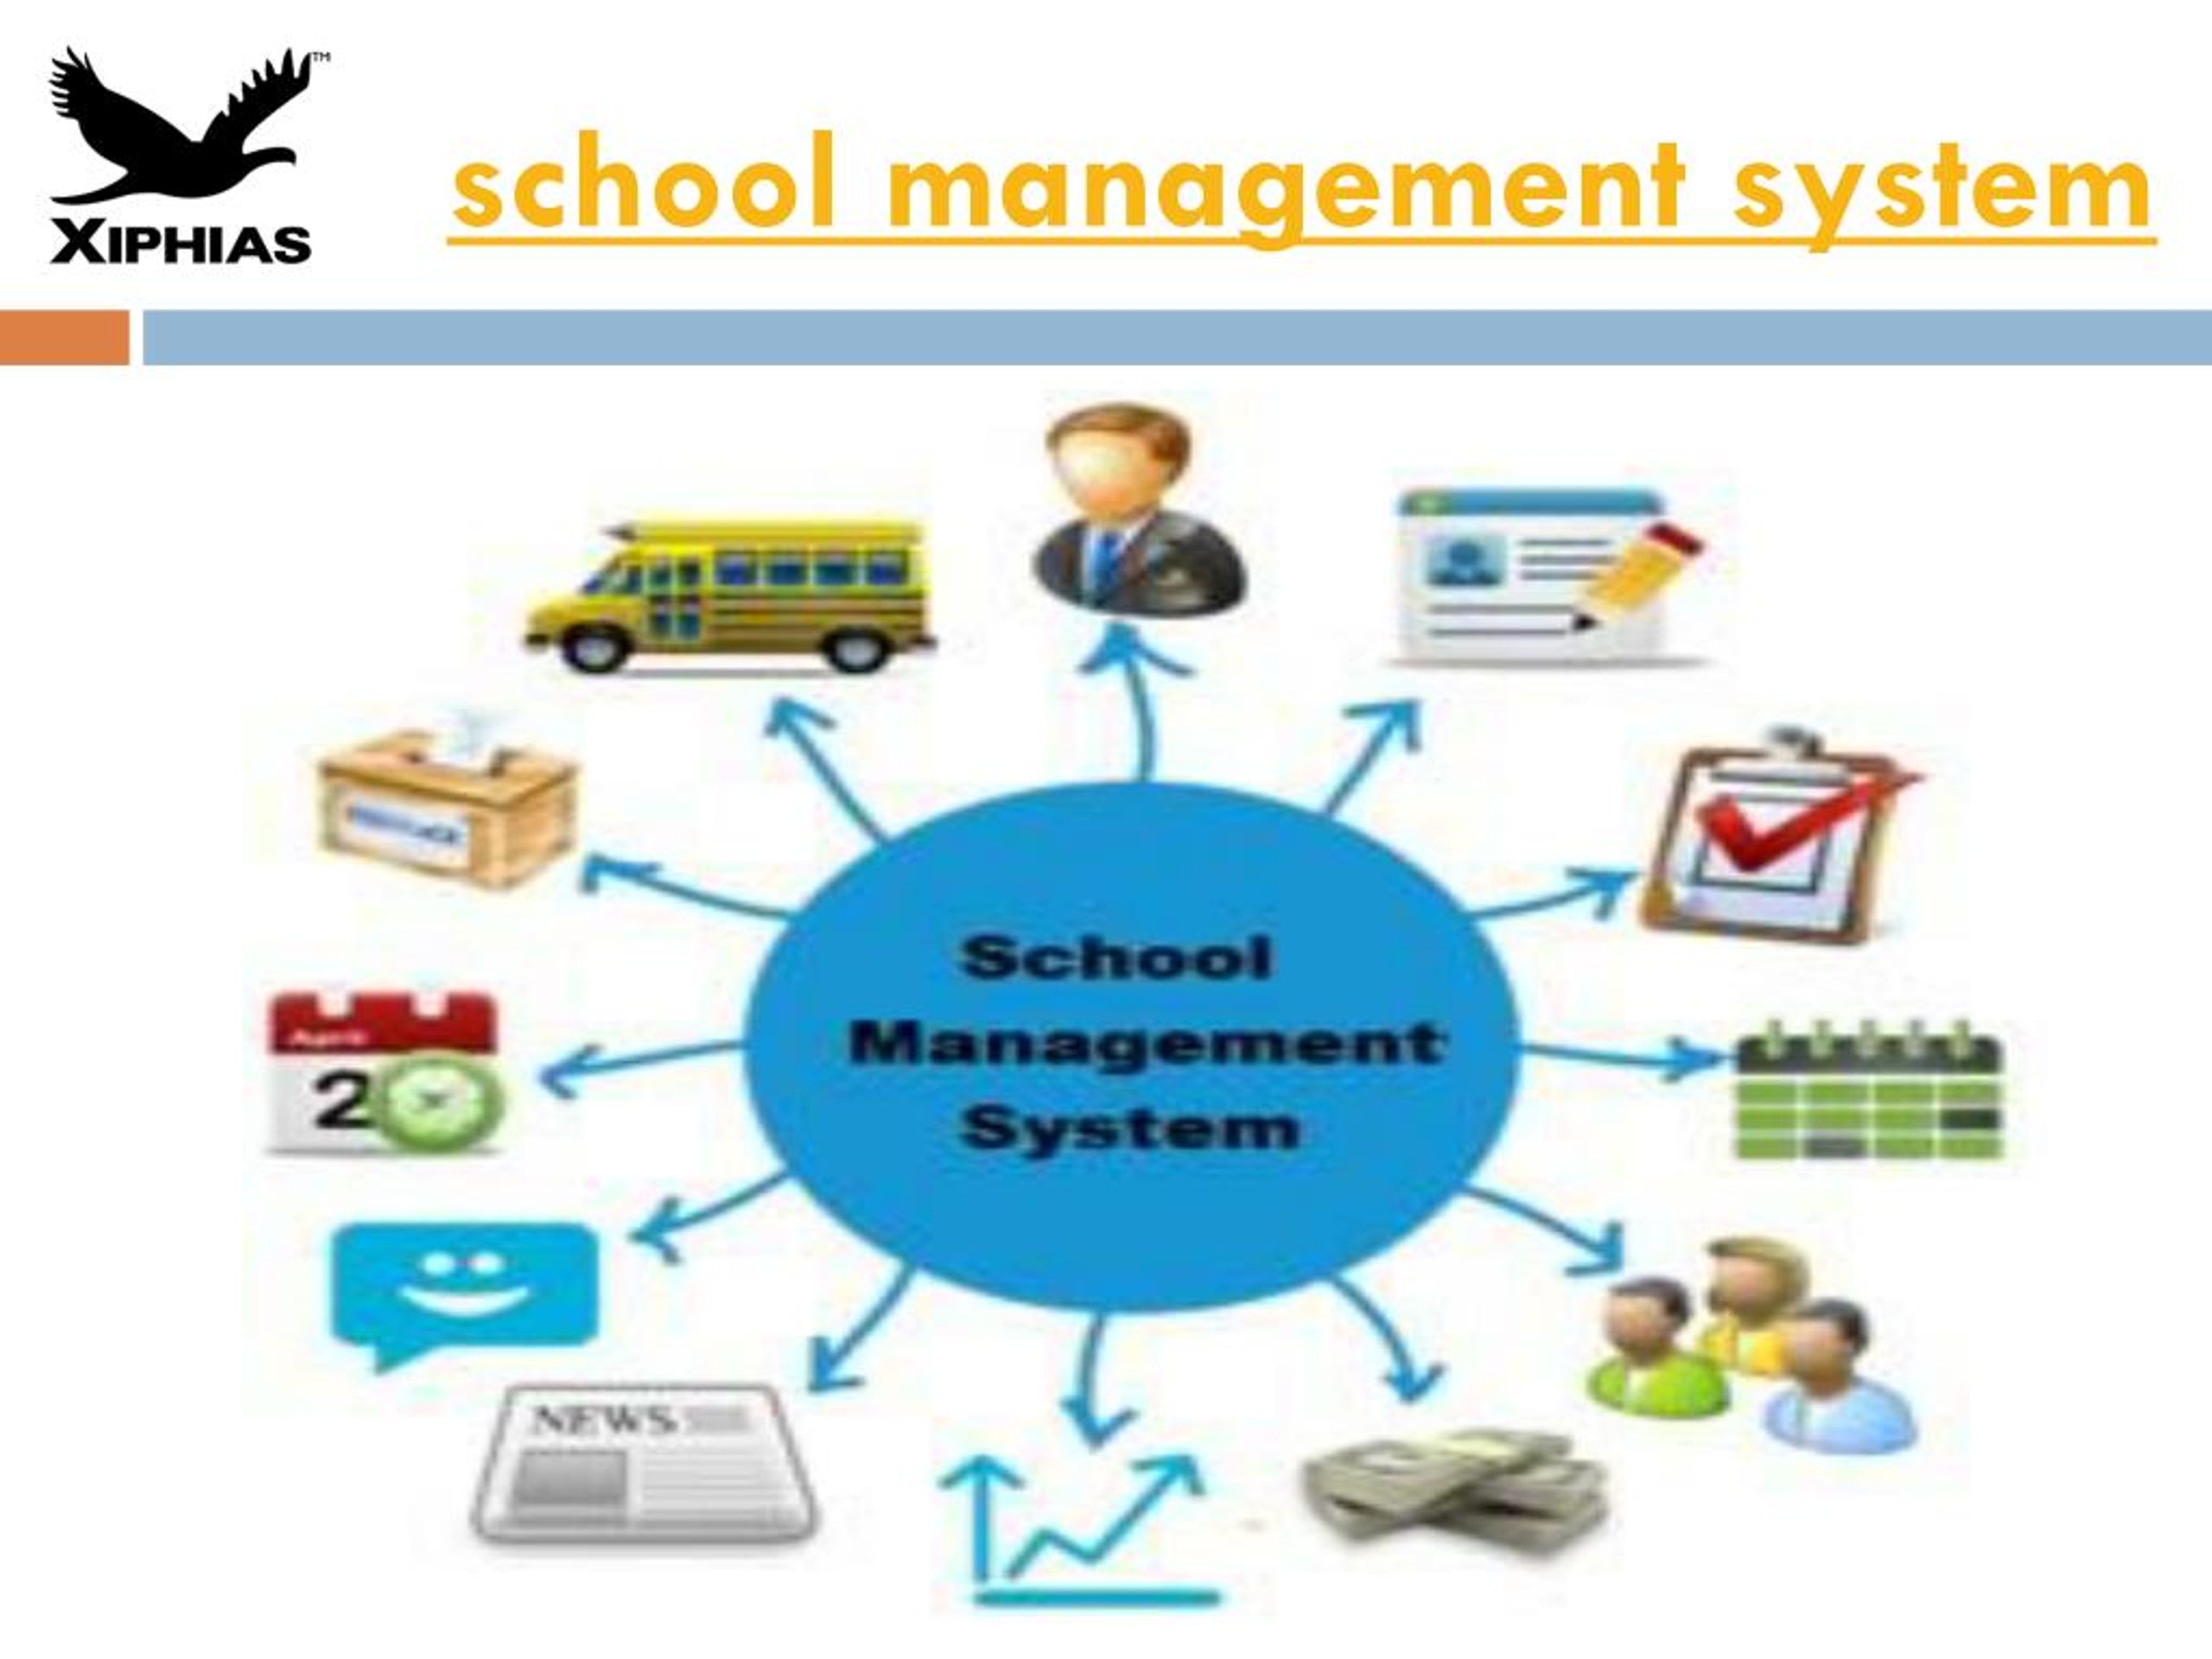 school management system research paper